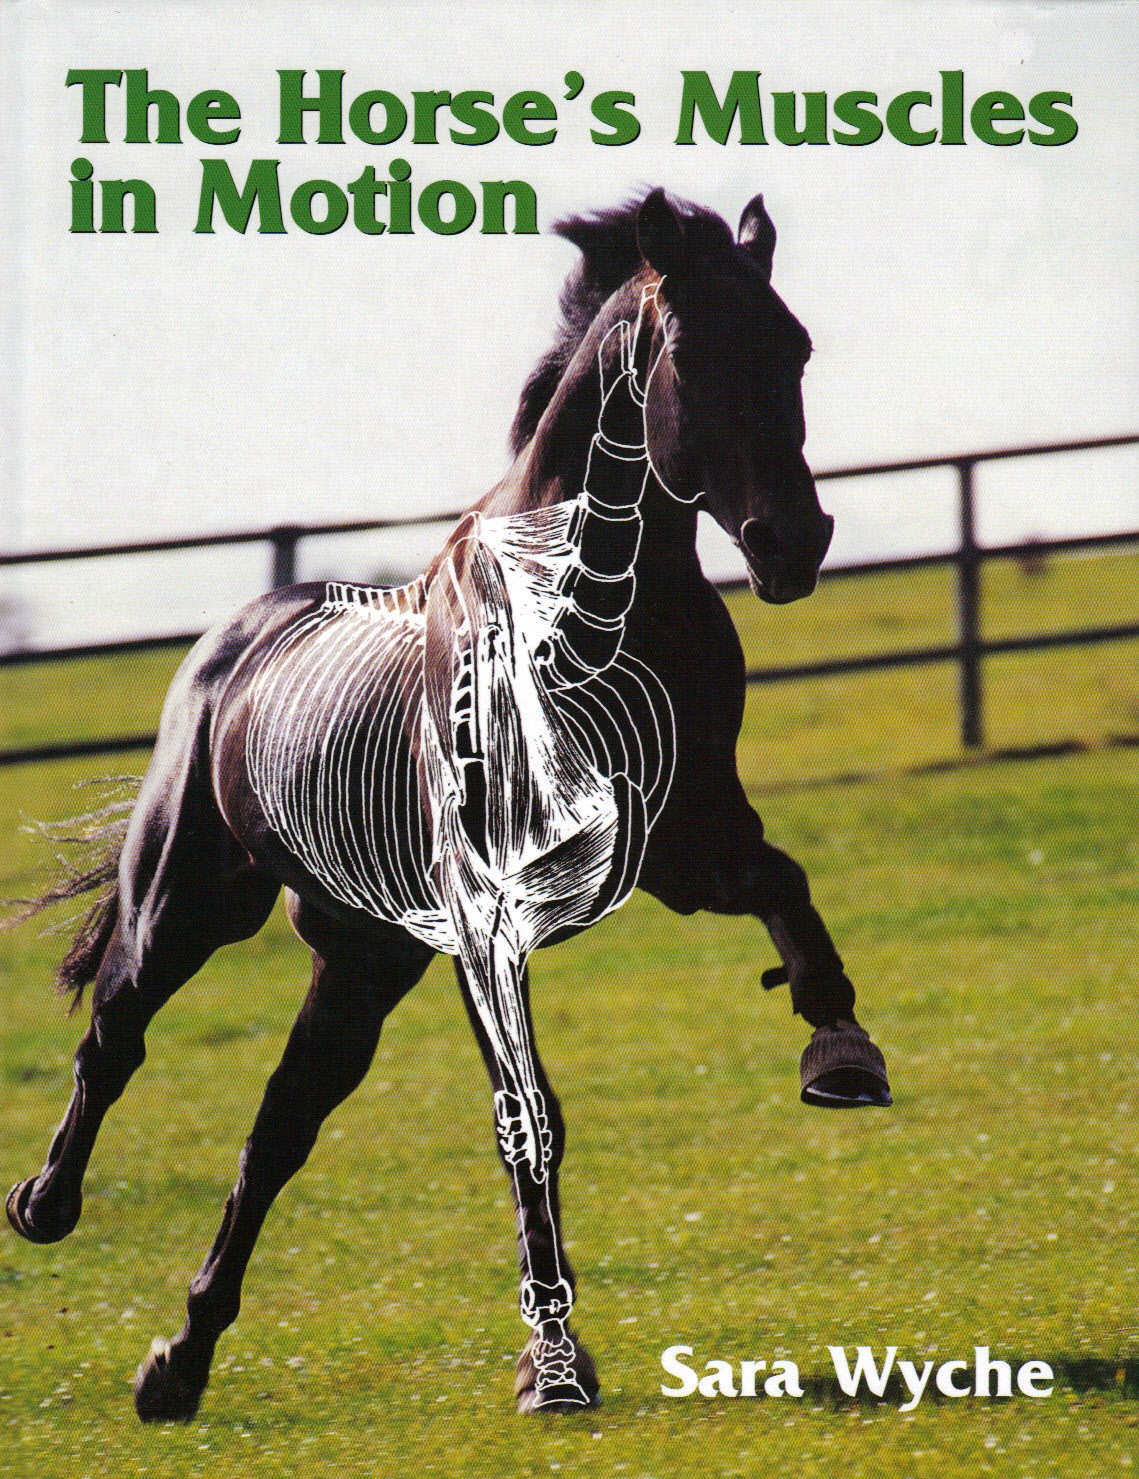 The Horse's Muscles in Motion by Sara Wyche from trot-online